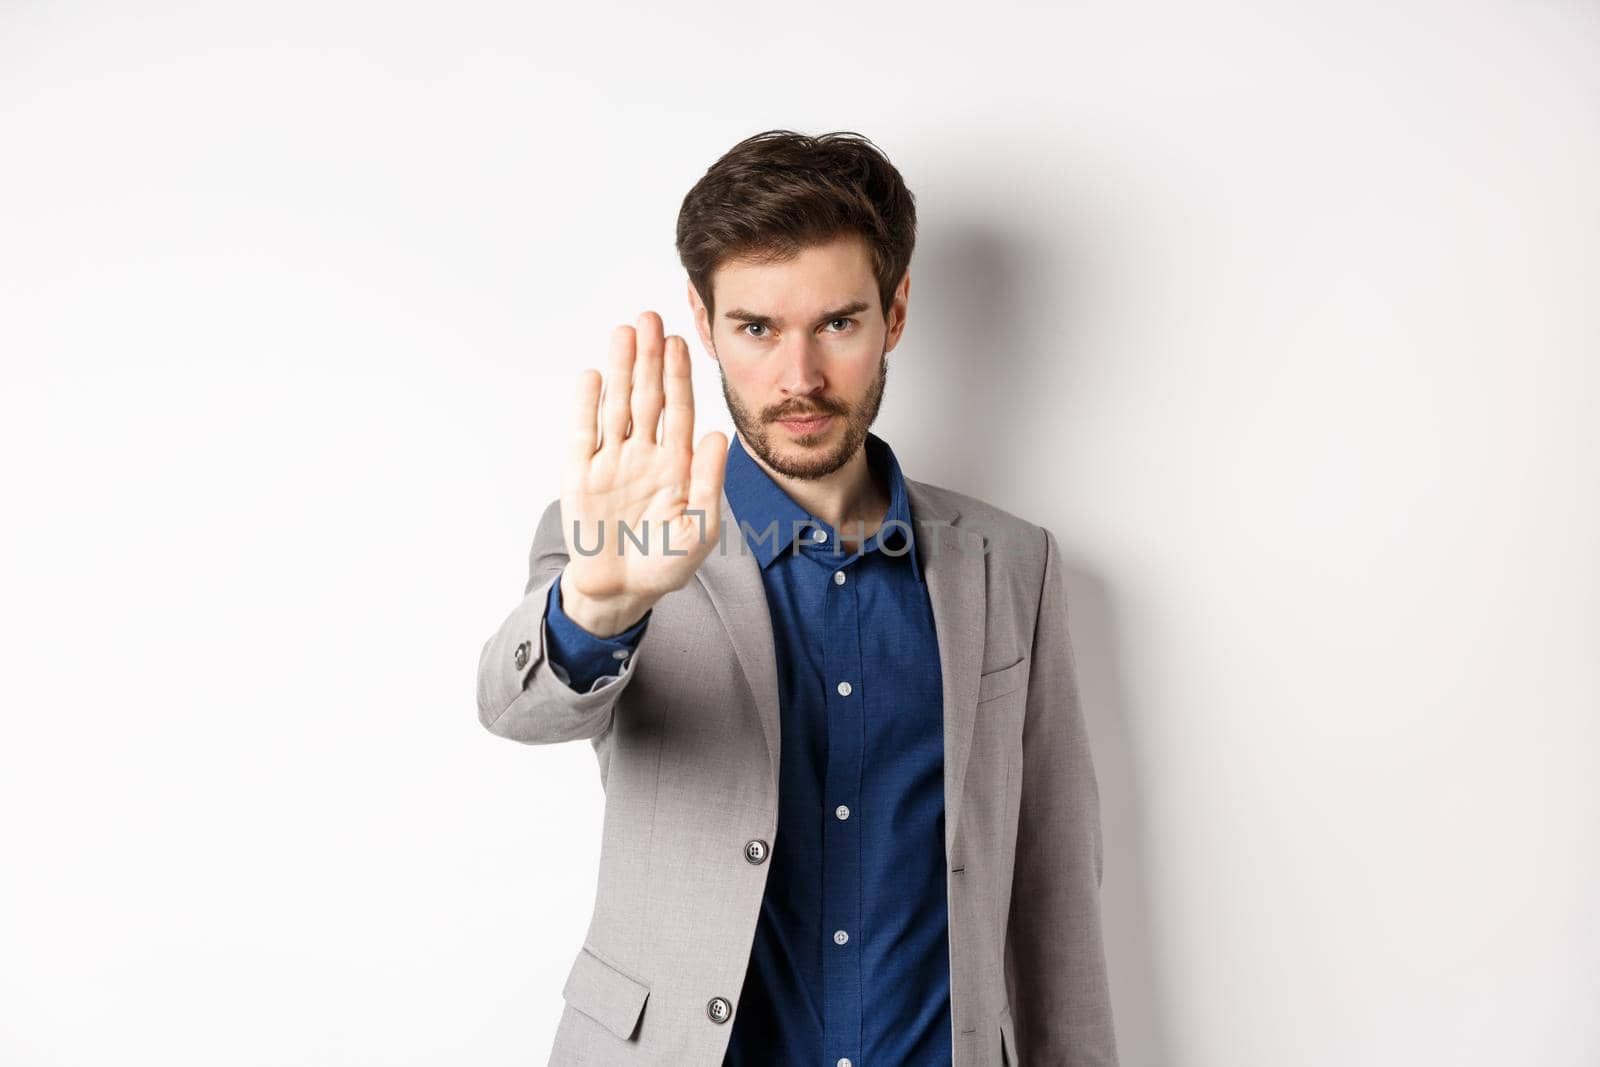 Hold right there. Serious businessman in suit stretch out hand and tell to stop, frowning and look confident, disapprove action, prohibit something bad, standing on white background.